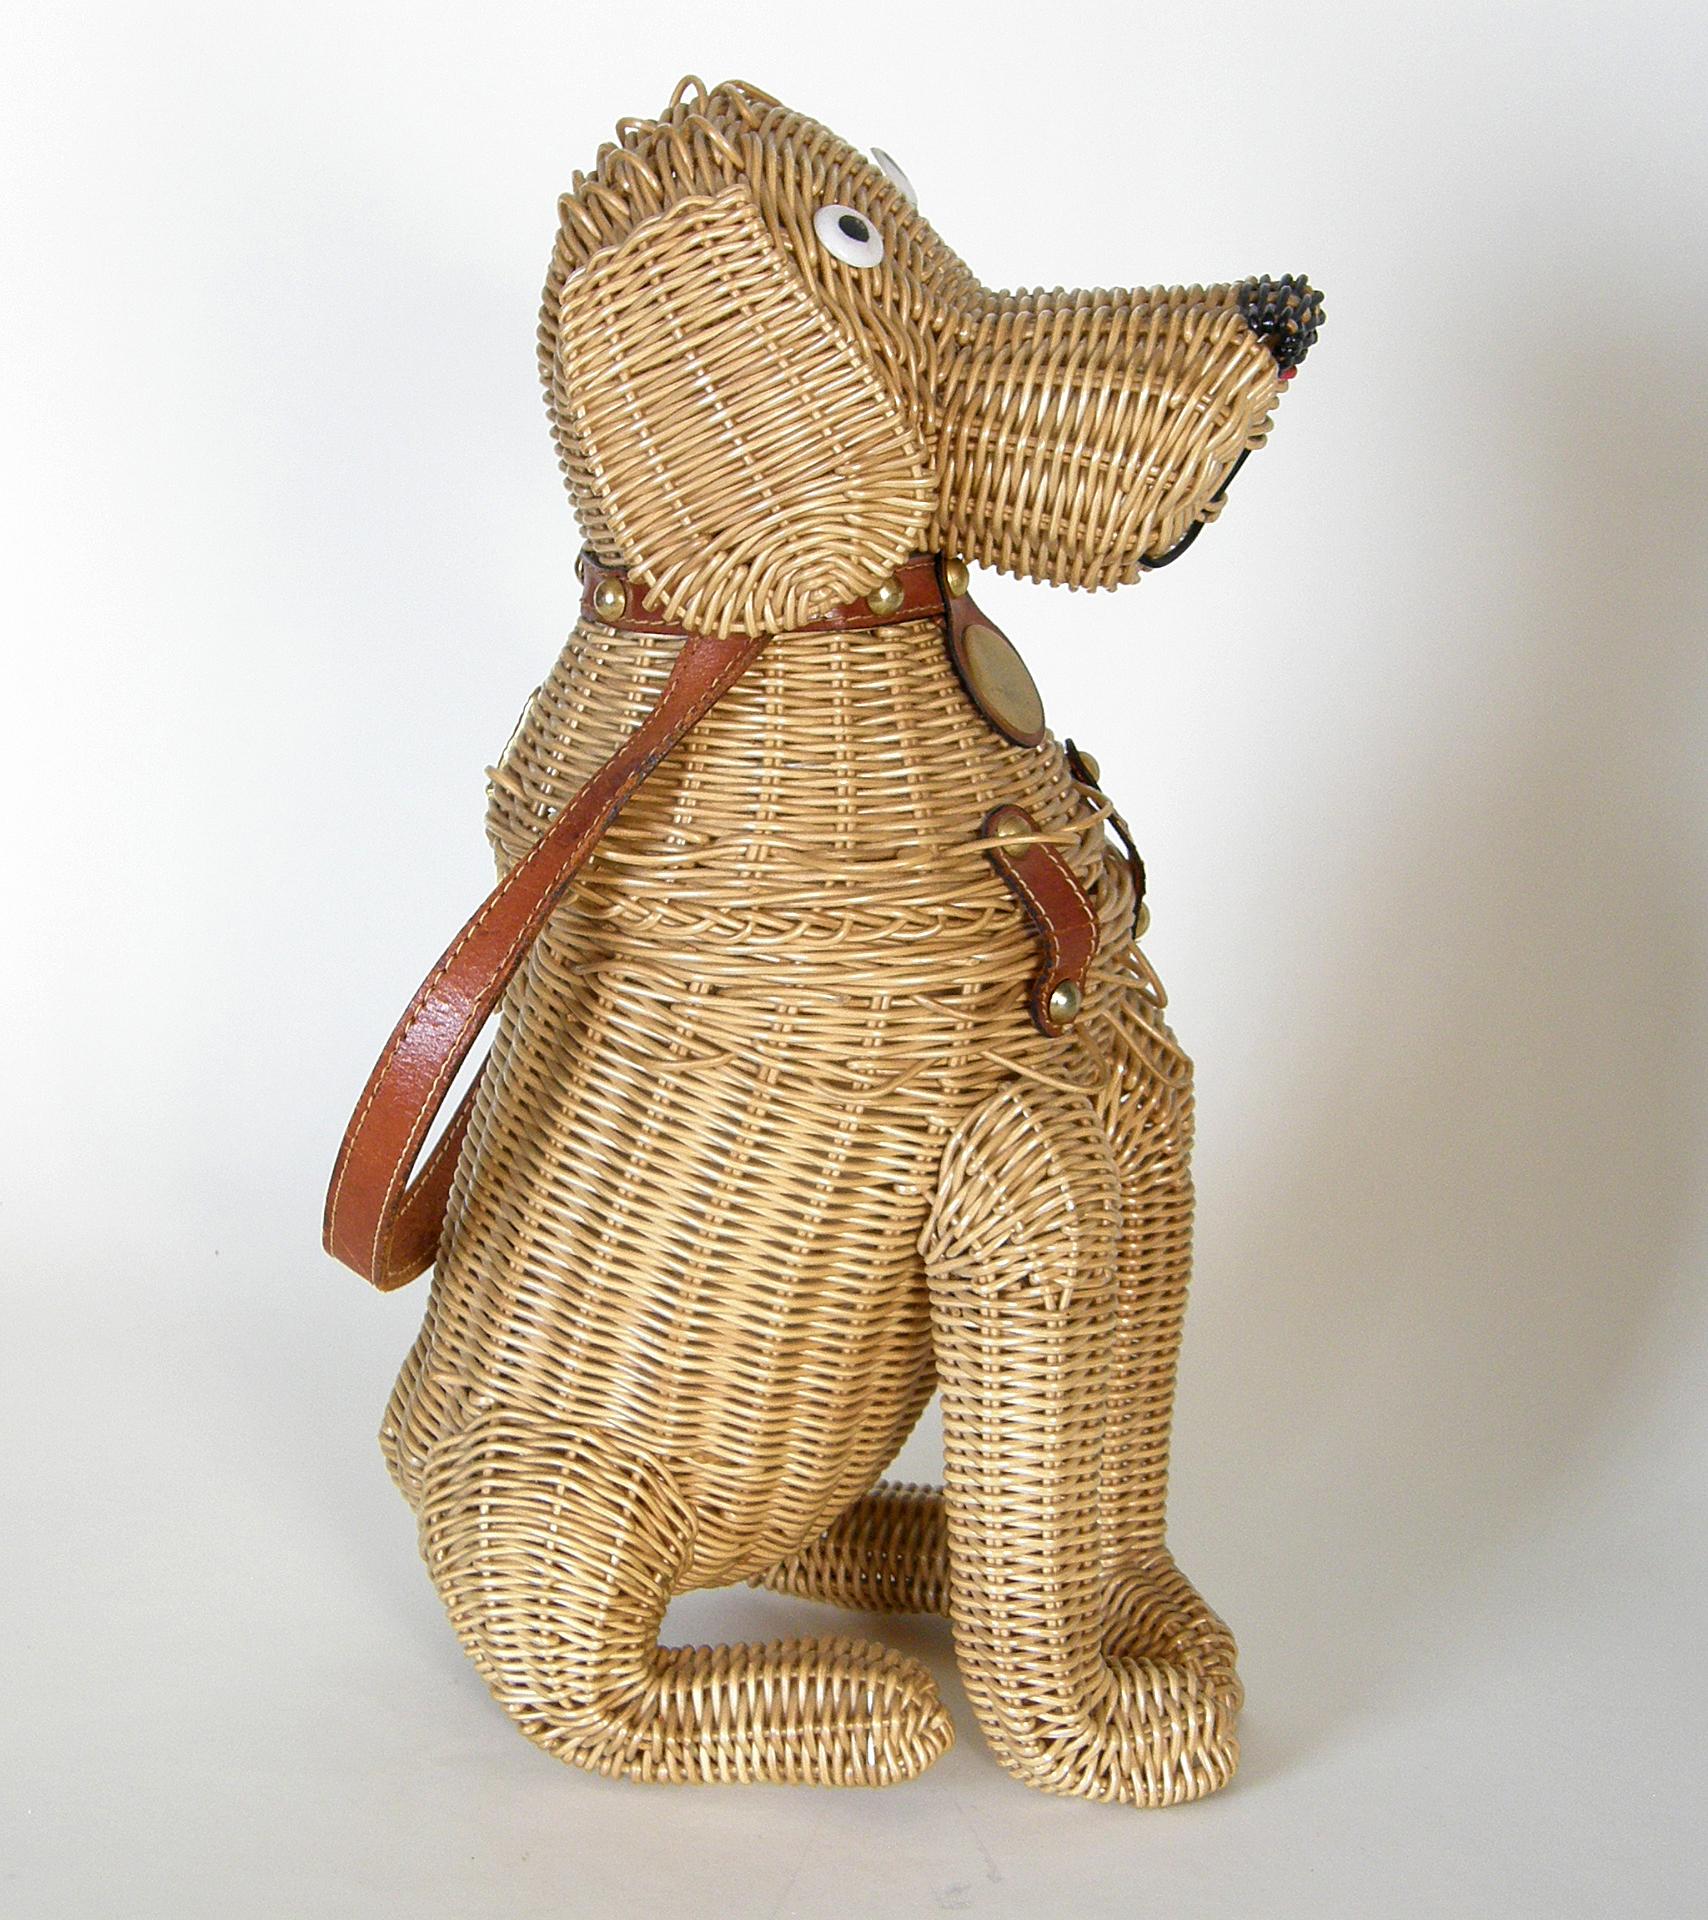 This handsome pooch is a wonderful example of a figural wicker handbag. He’s made of plastic coated wicker, which makes the wicker stronger and less susceptible to breakage. He’s tall and smiley, and sitting at attention like a good dog.

Of